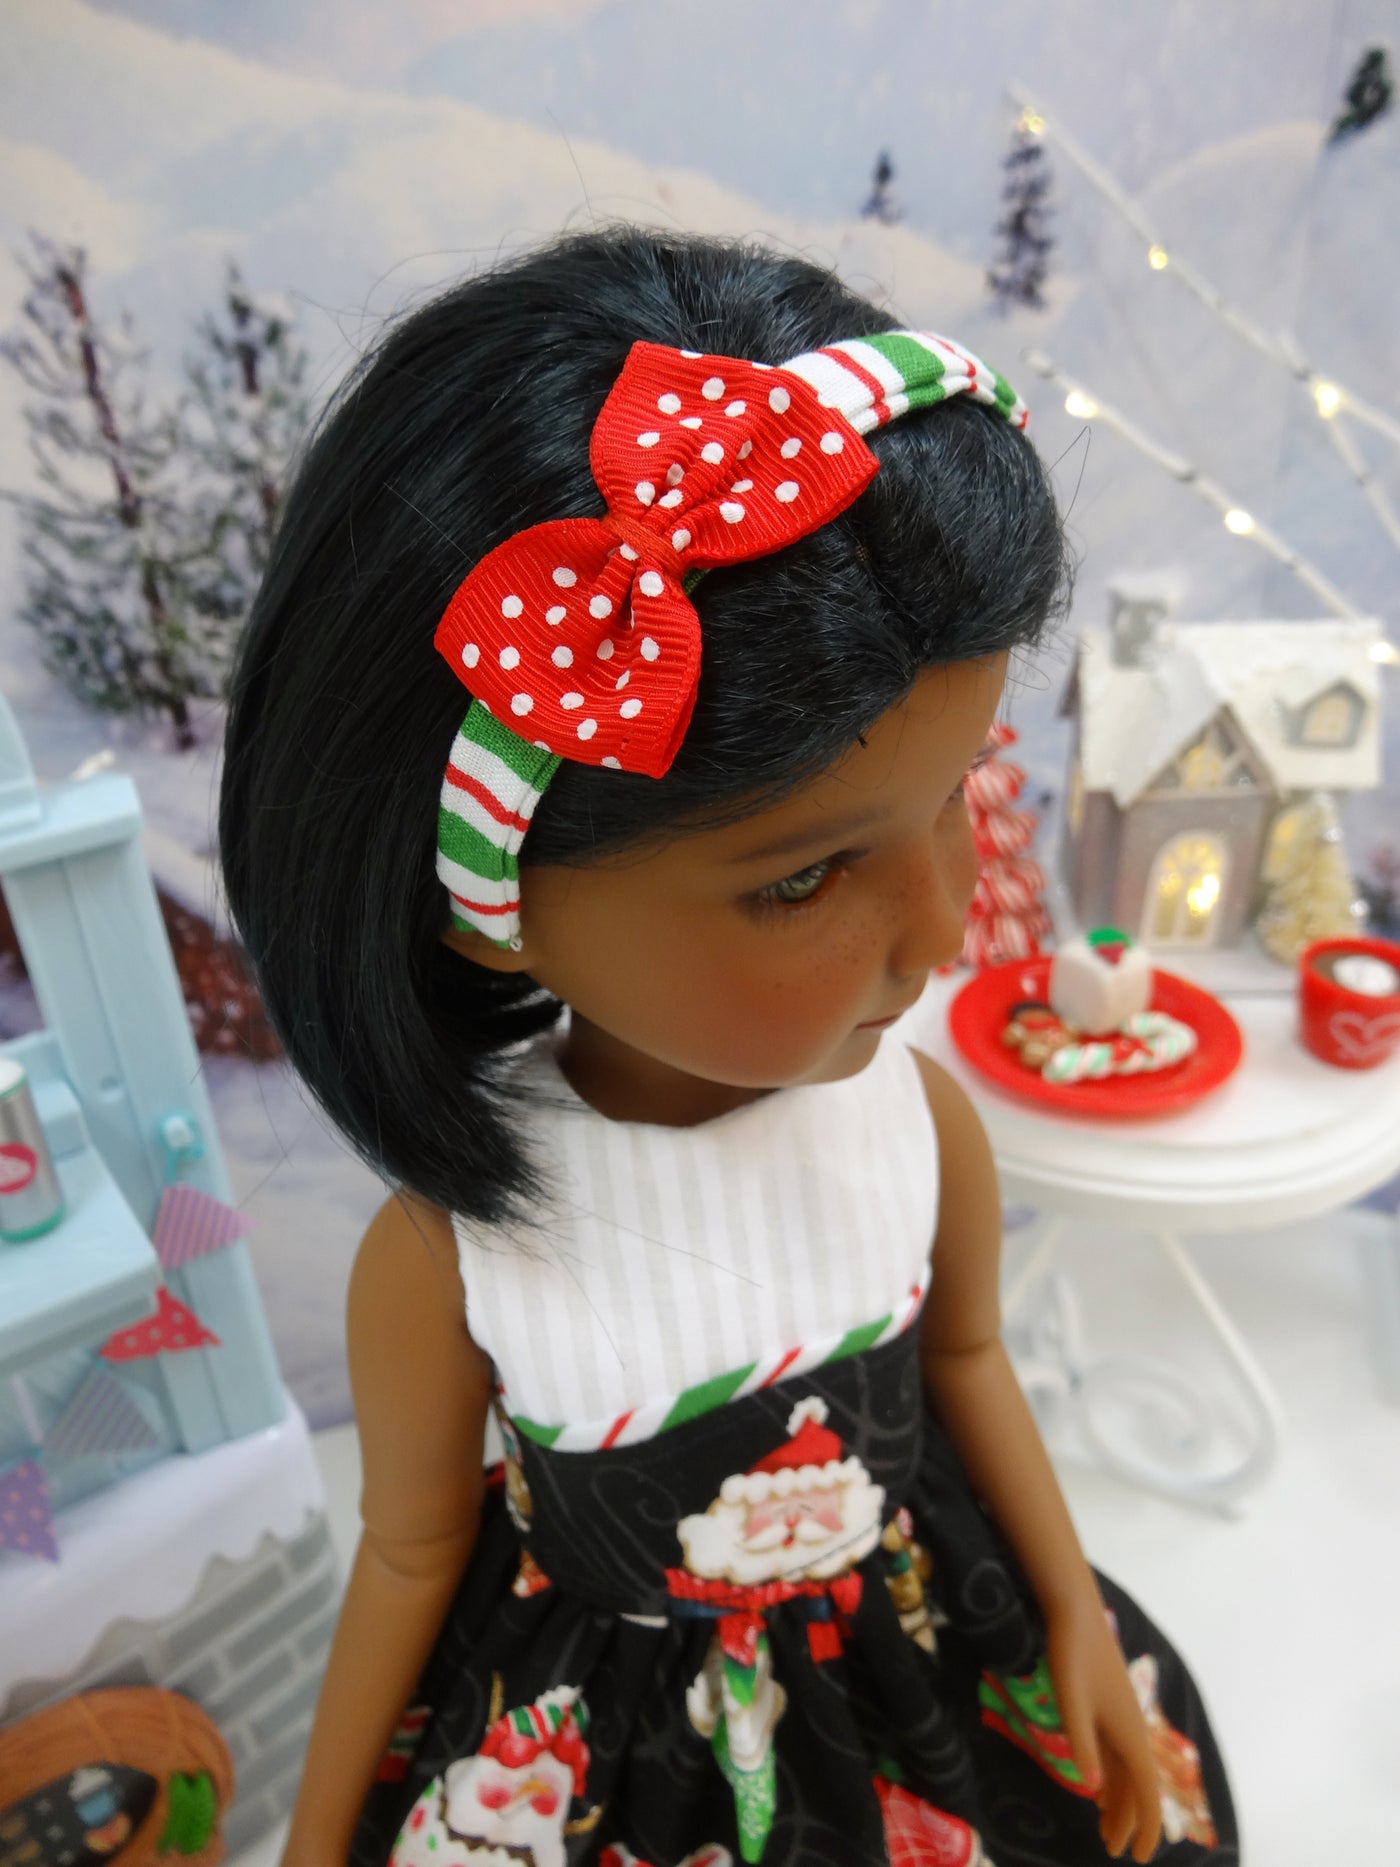 Holiday Cupcakes - dress with shoes for Ruby Red Fashion Friends doll